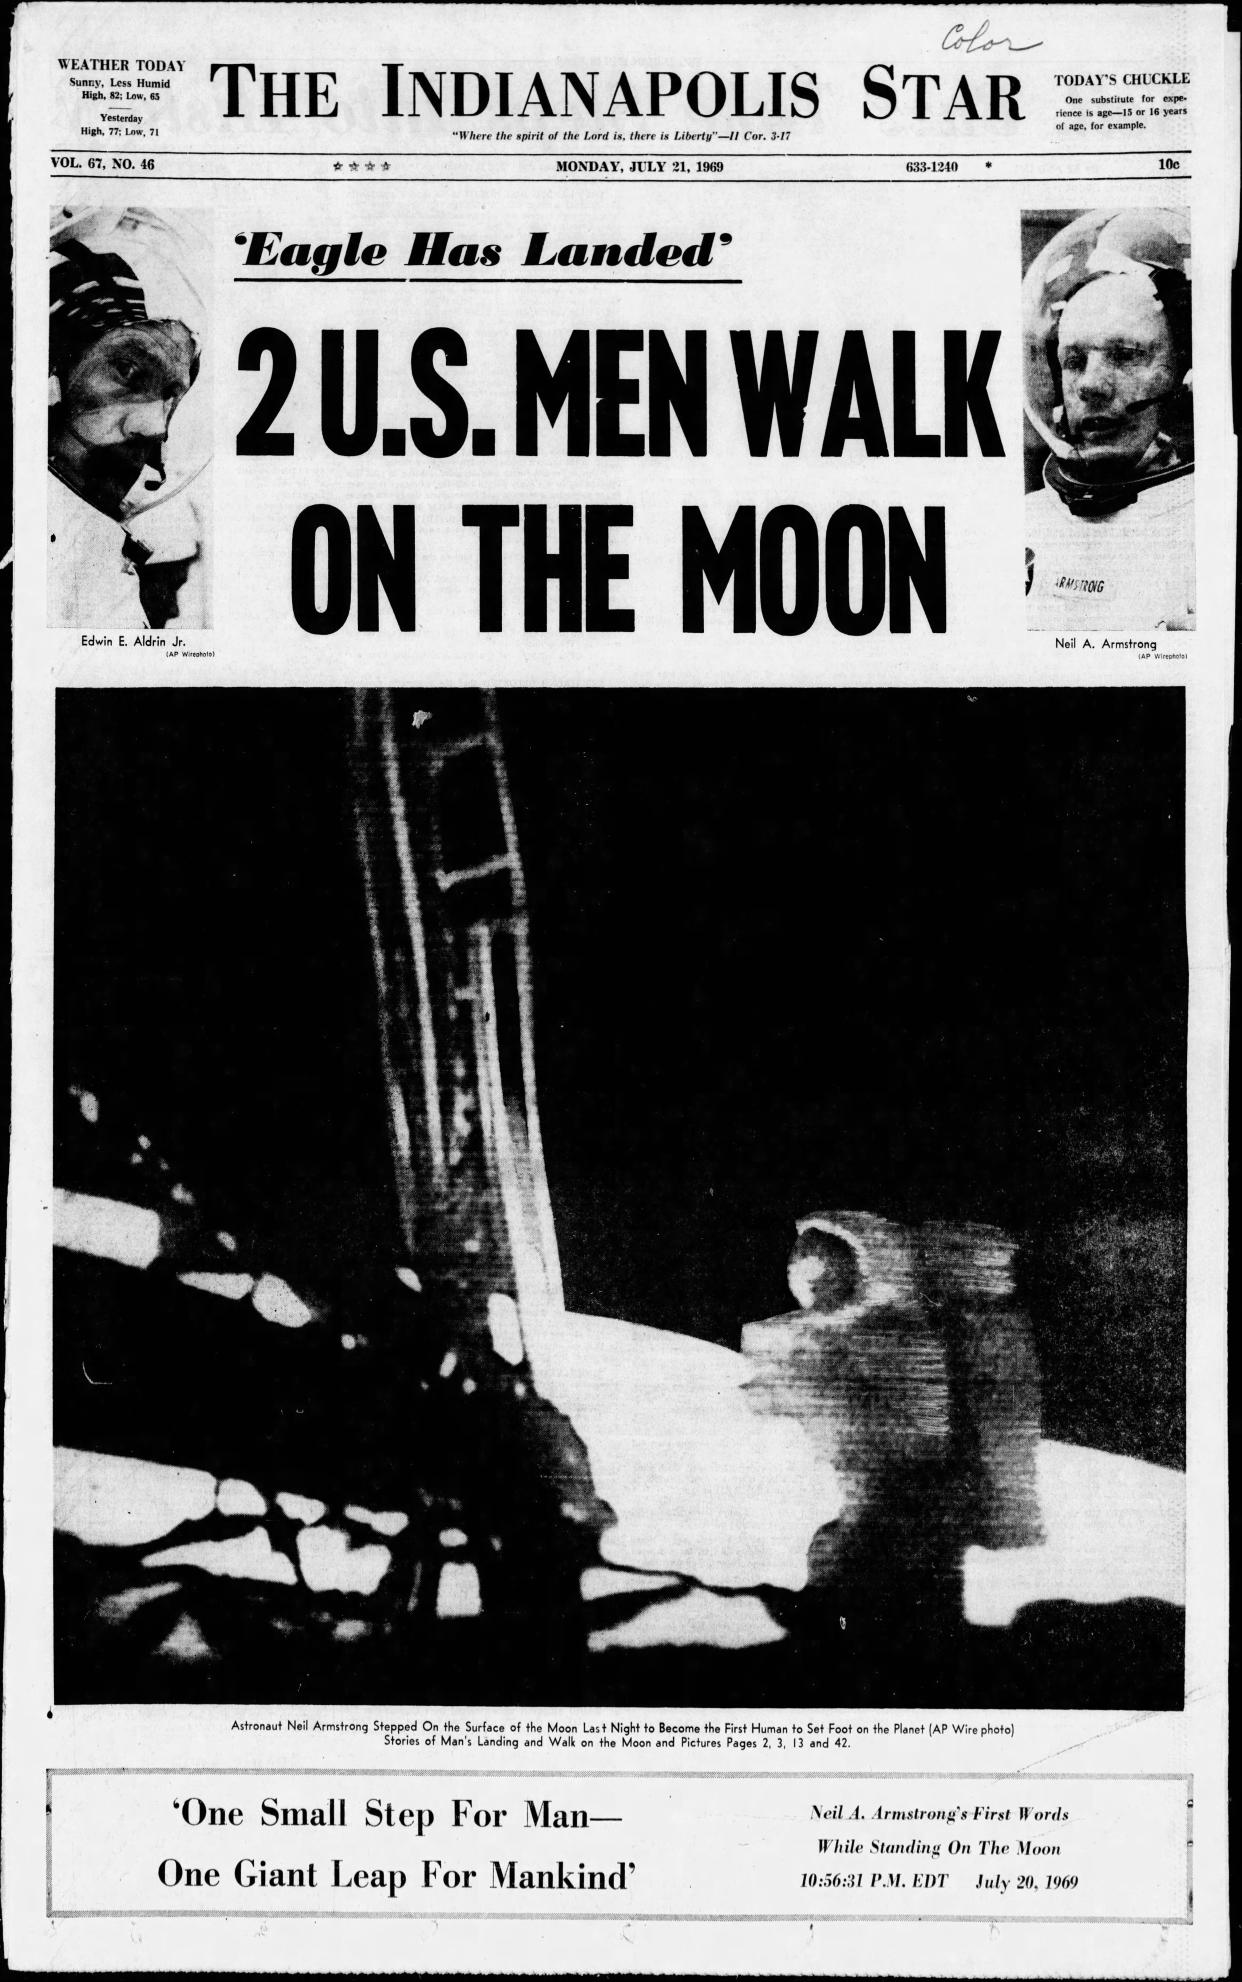 Indianapolis Star from Monday, July 21, 1969 when humans first set foot on the moon